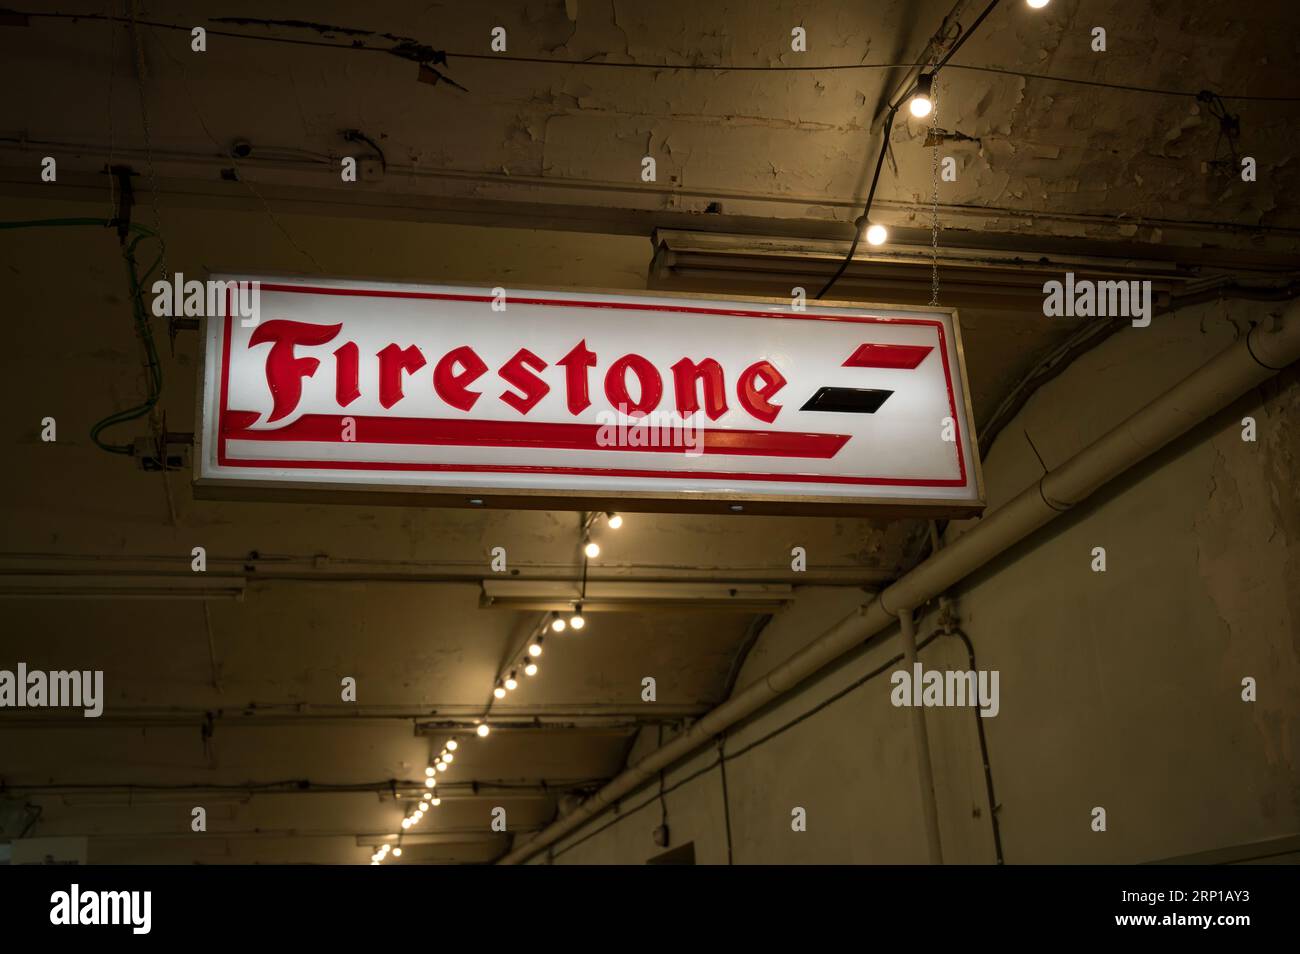 A closeup of an old illuminated sign for Firestone tires in an old workshop Stock Photo